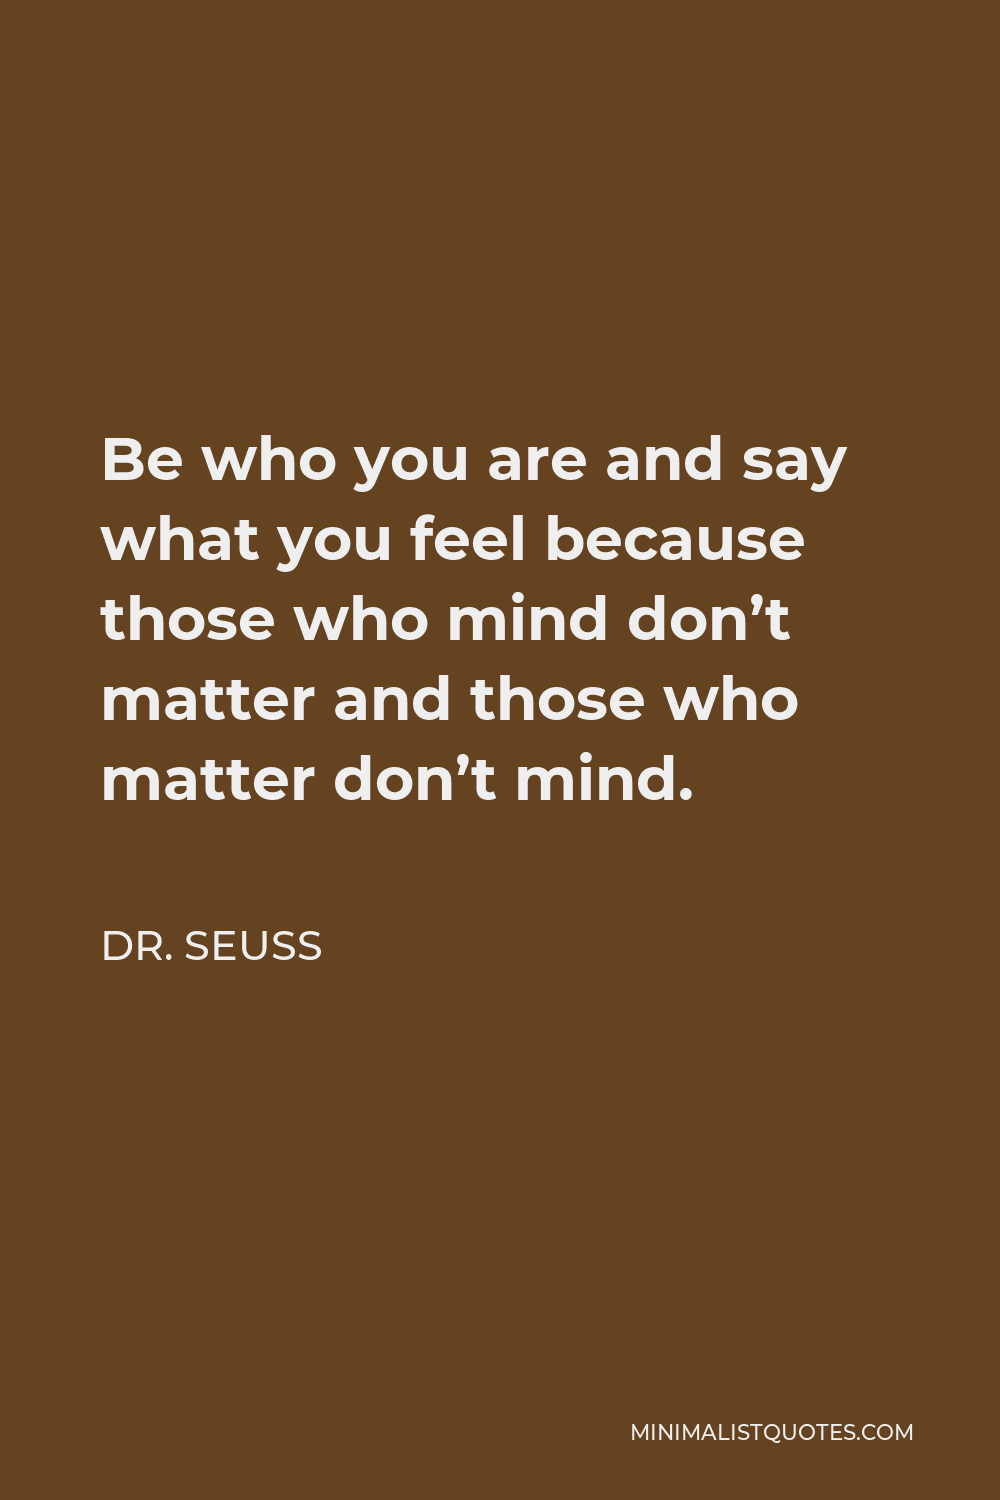 Dr. Seuss Quote - Be who you are and say what you feel because those who mind don’t matter and those who matter don’t mind.